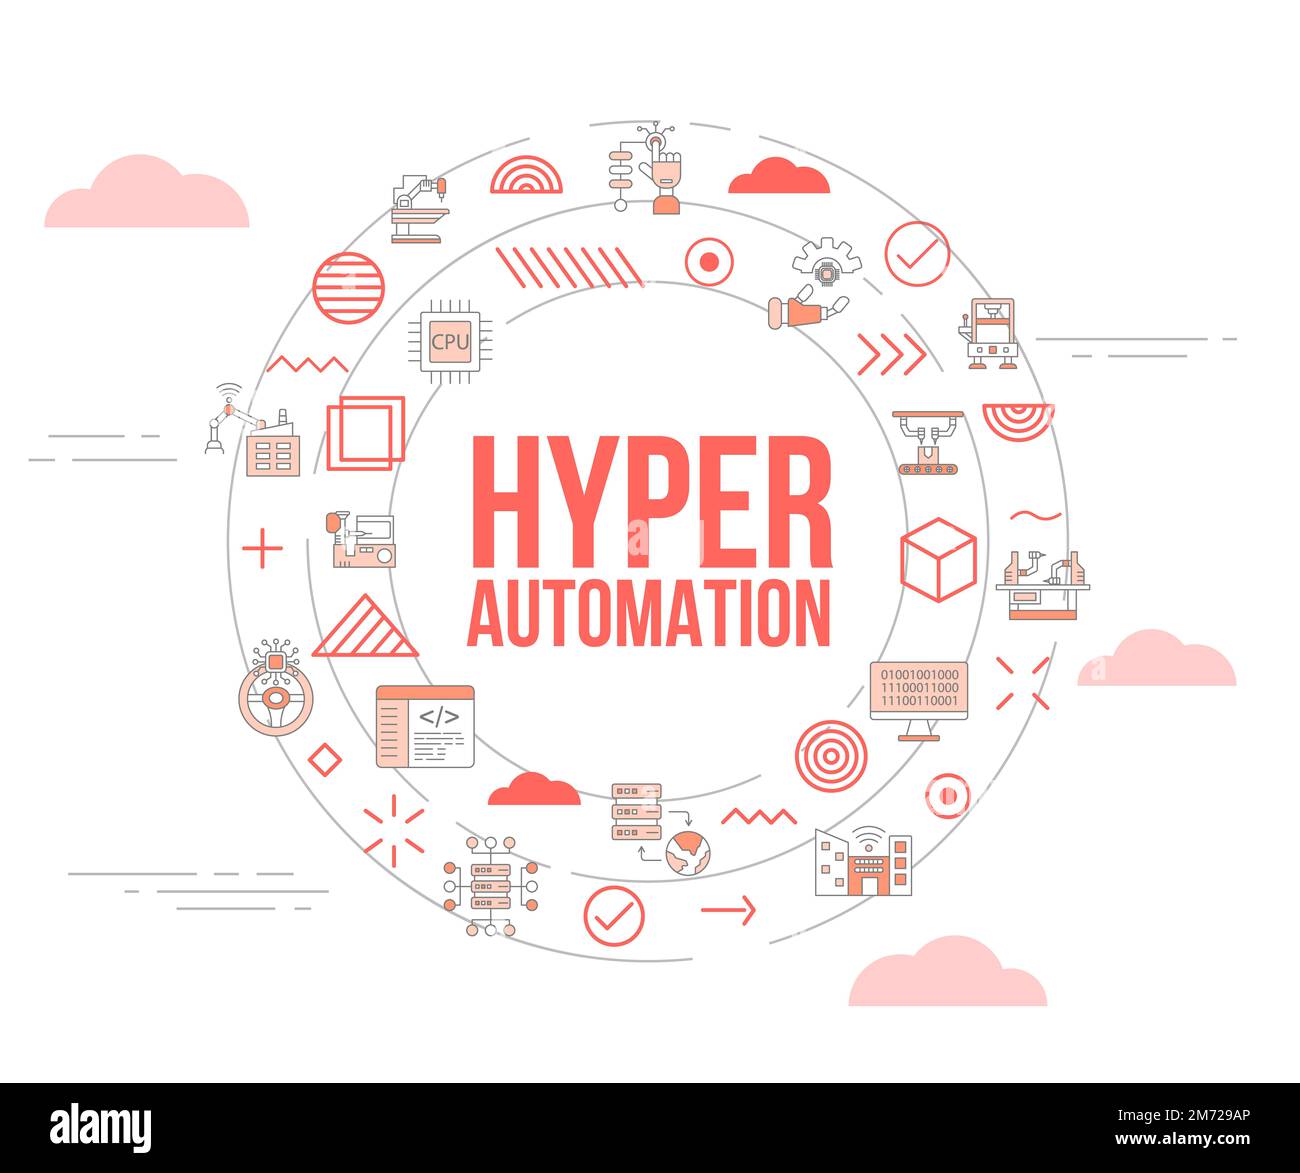 hyper automation concept with icon set template banner and circle round shape vector illustration Stock Photo